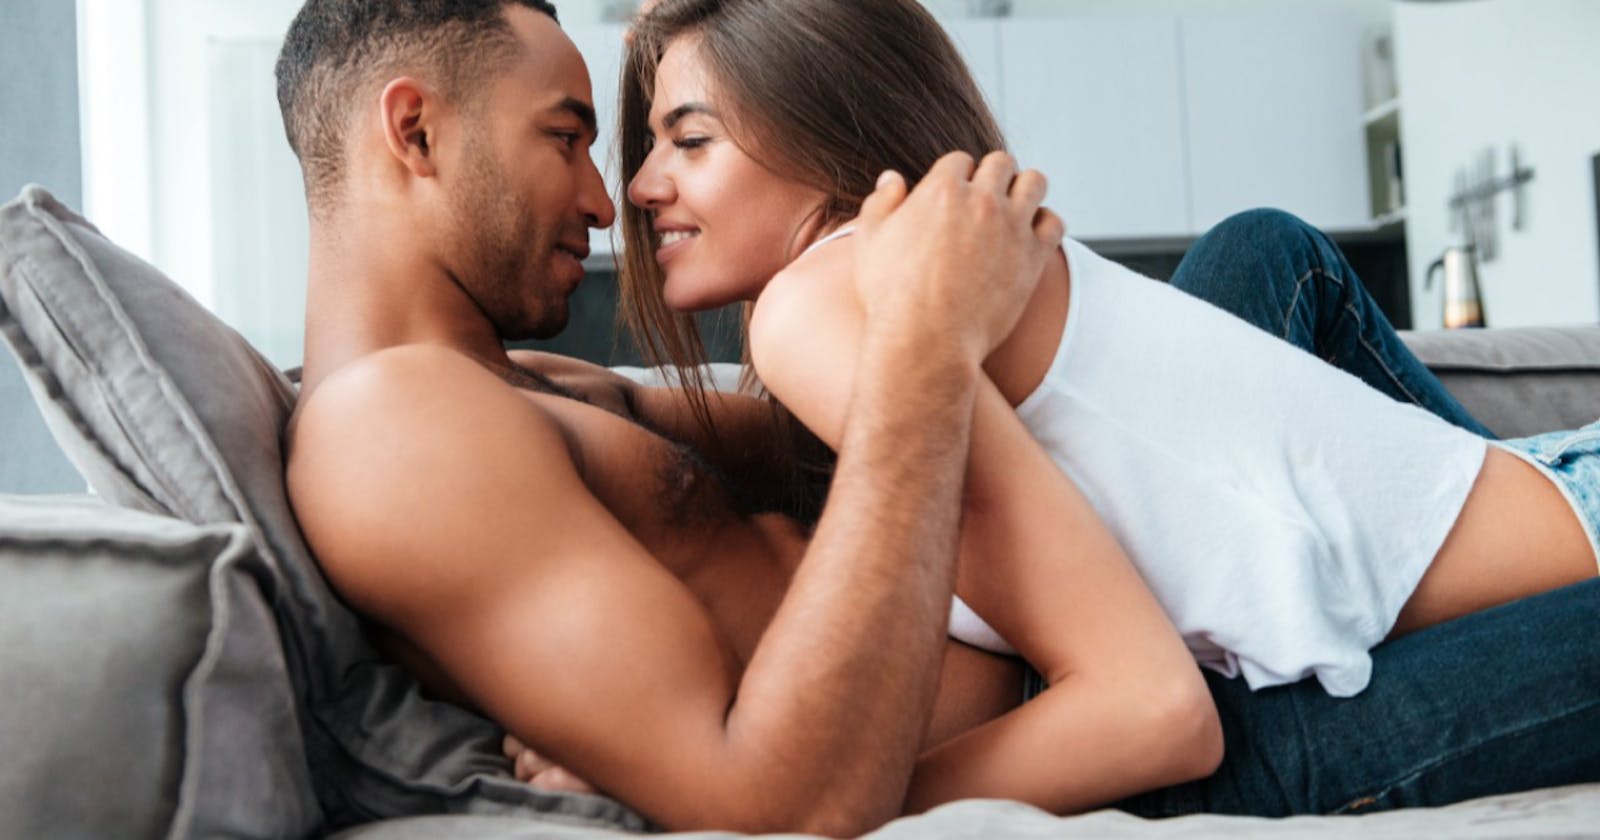 Knox A Trill Male Enhancement : Negative Side Effects or Legit Benefits?